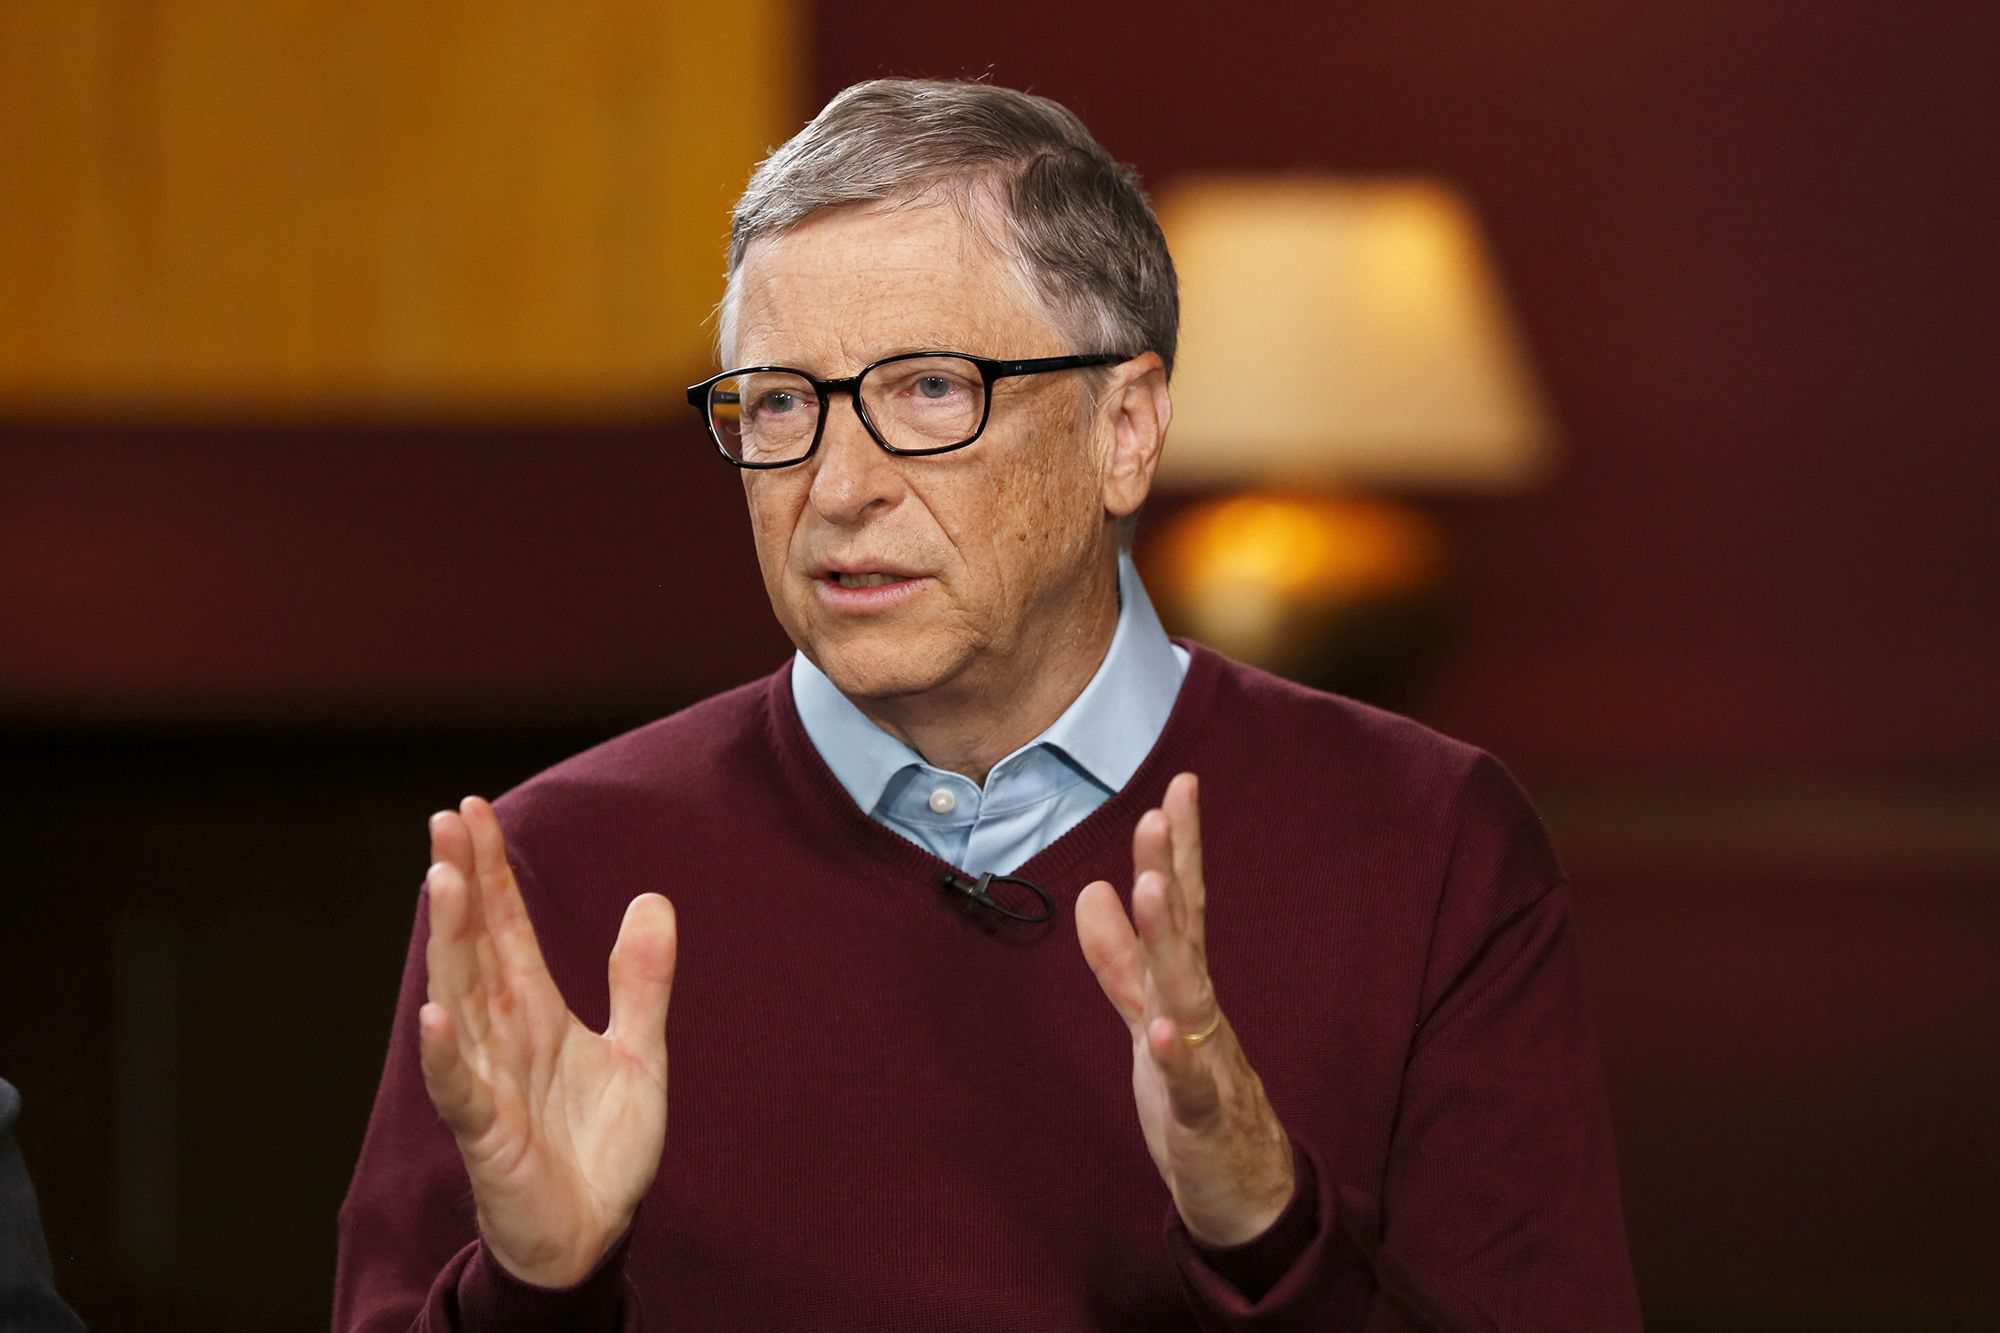 Bill Gates says he talked with Google employees about AI, health care